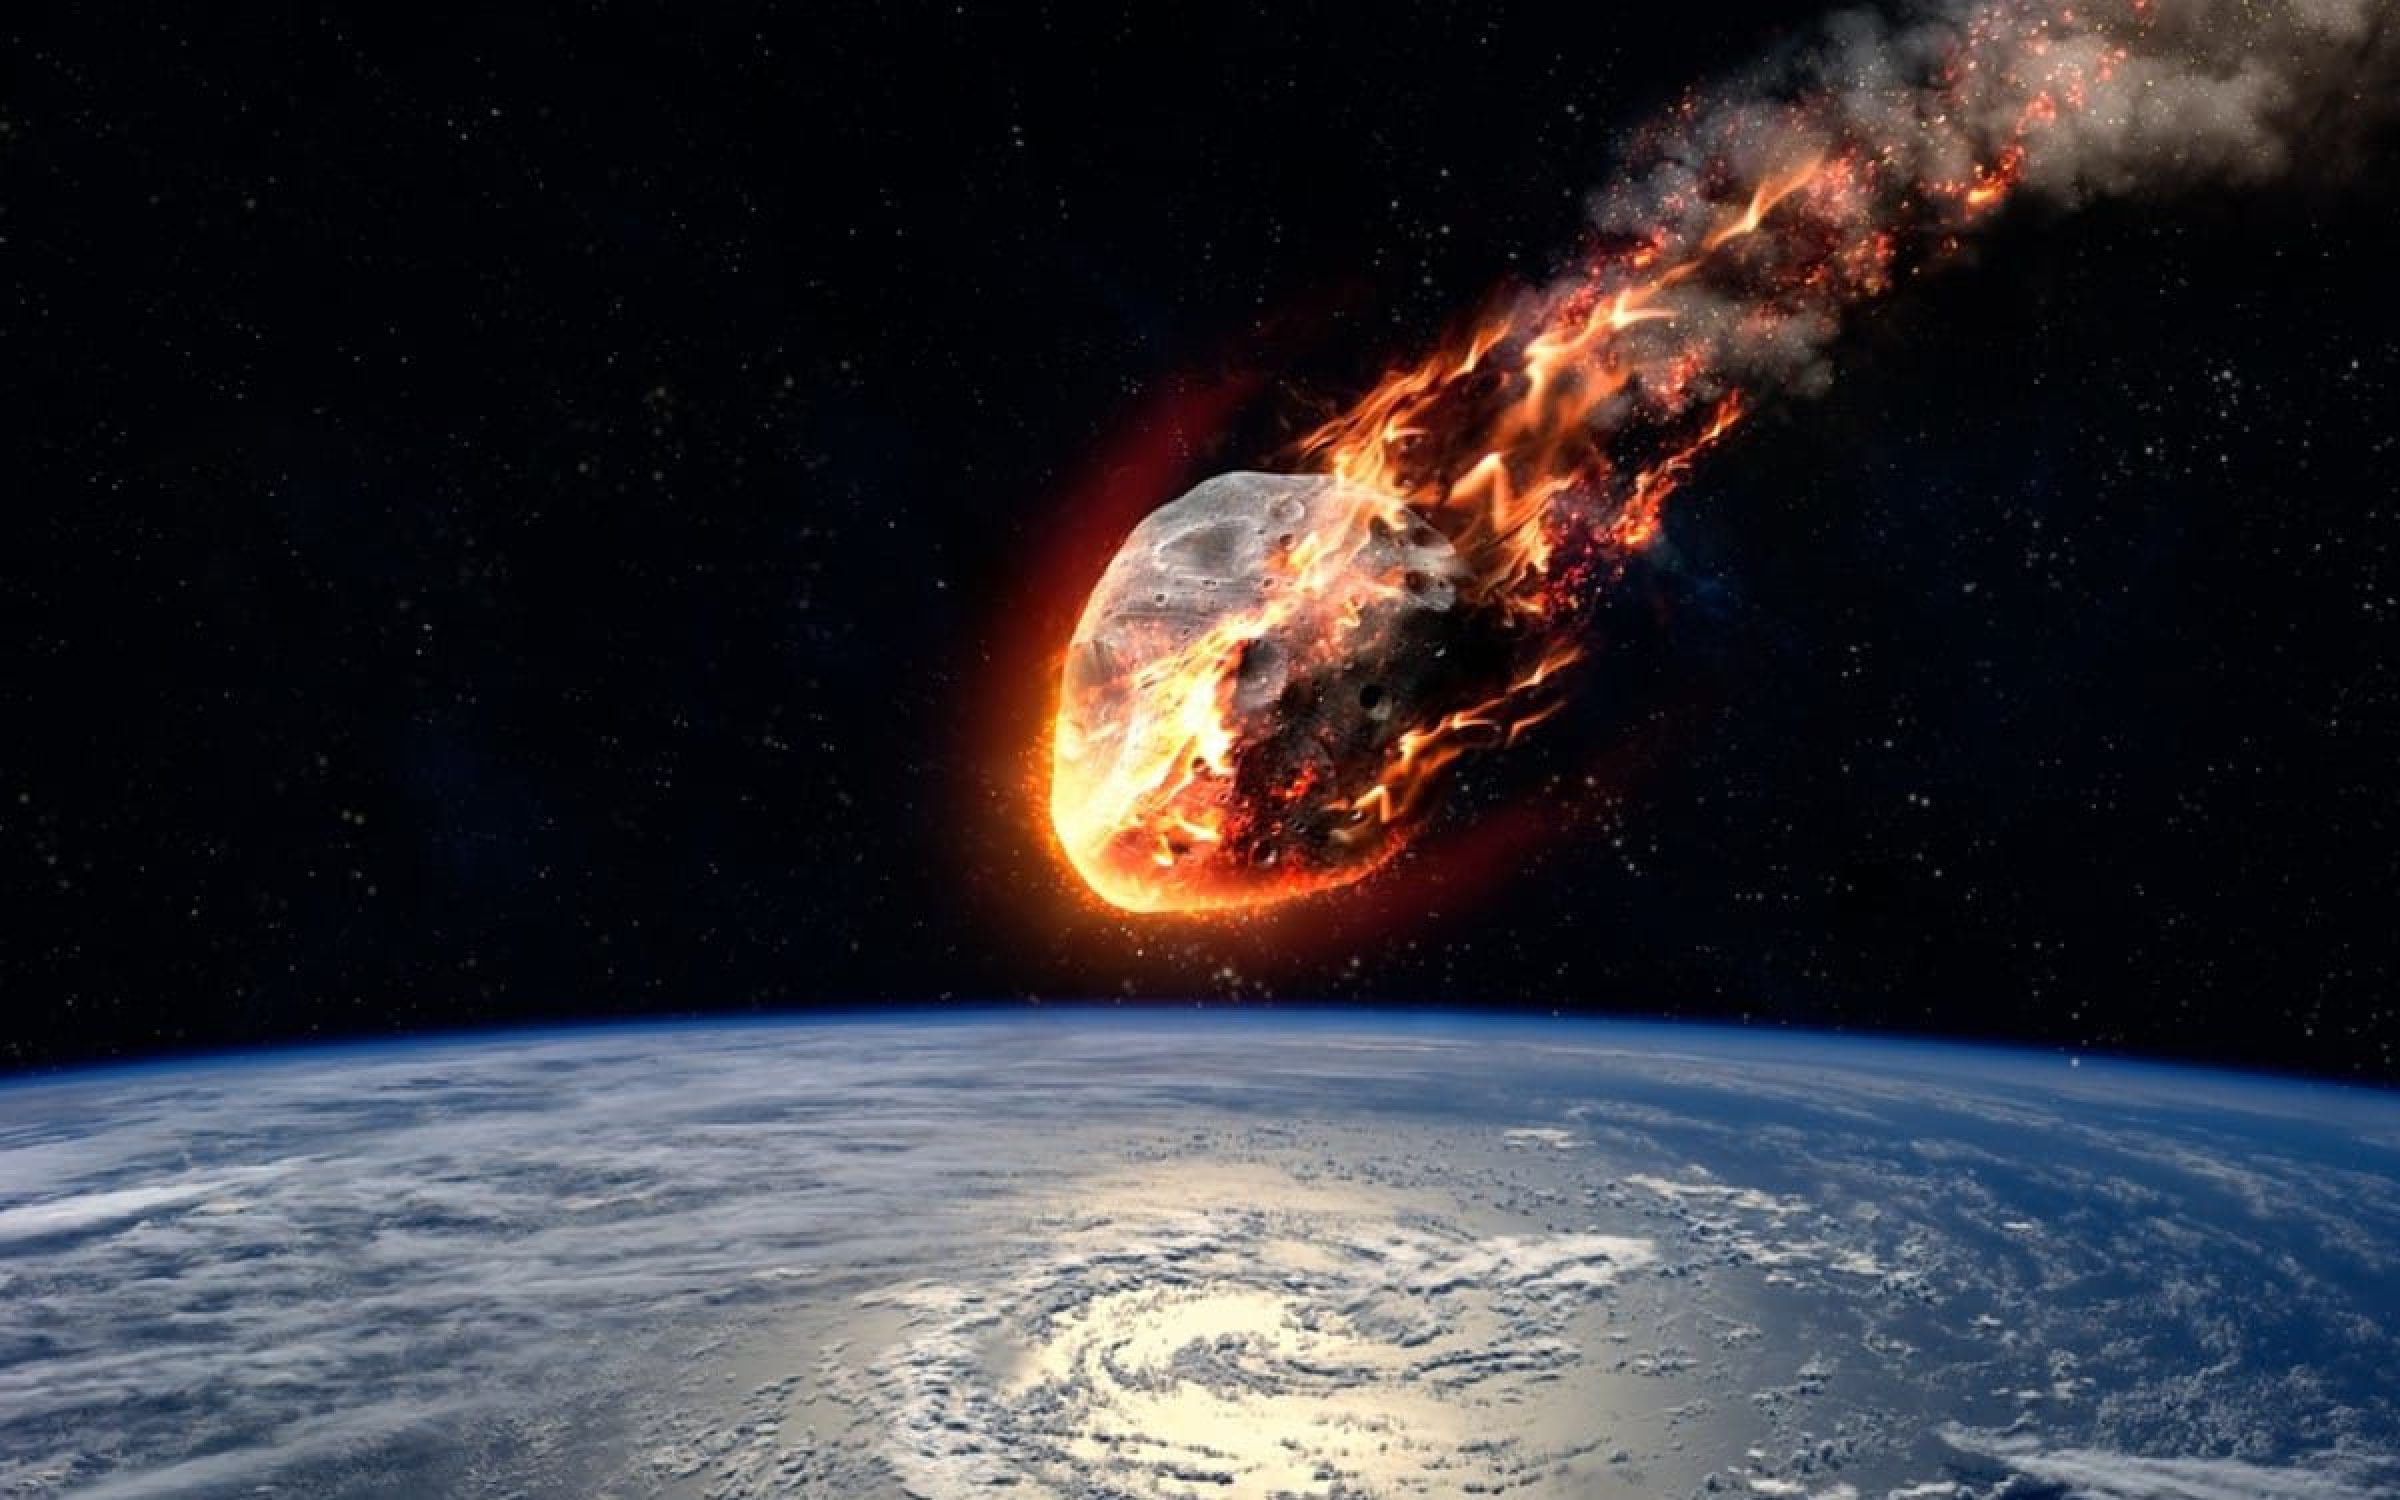 A Meteor glowing as it enters the Earth's atmosphere. Elements of this image furnished by NASA